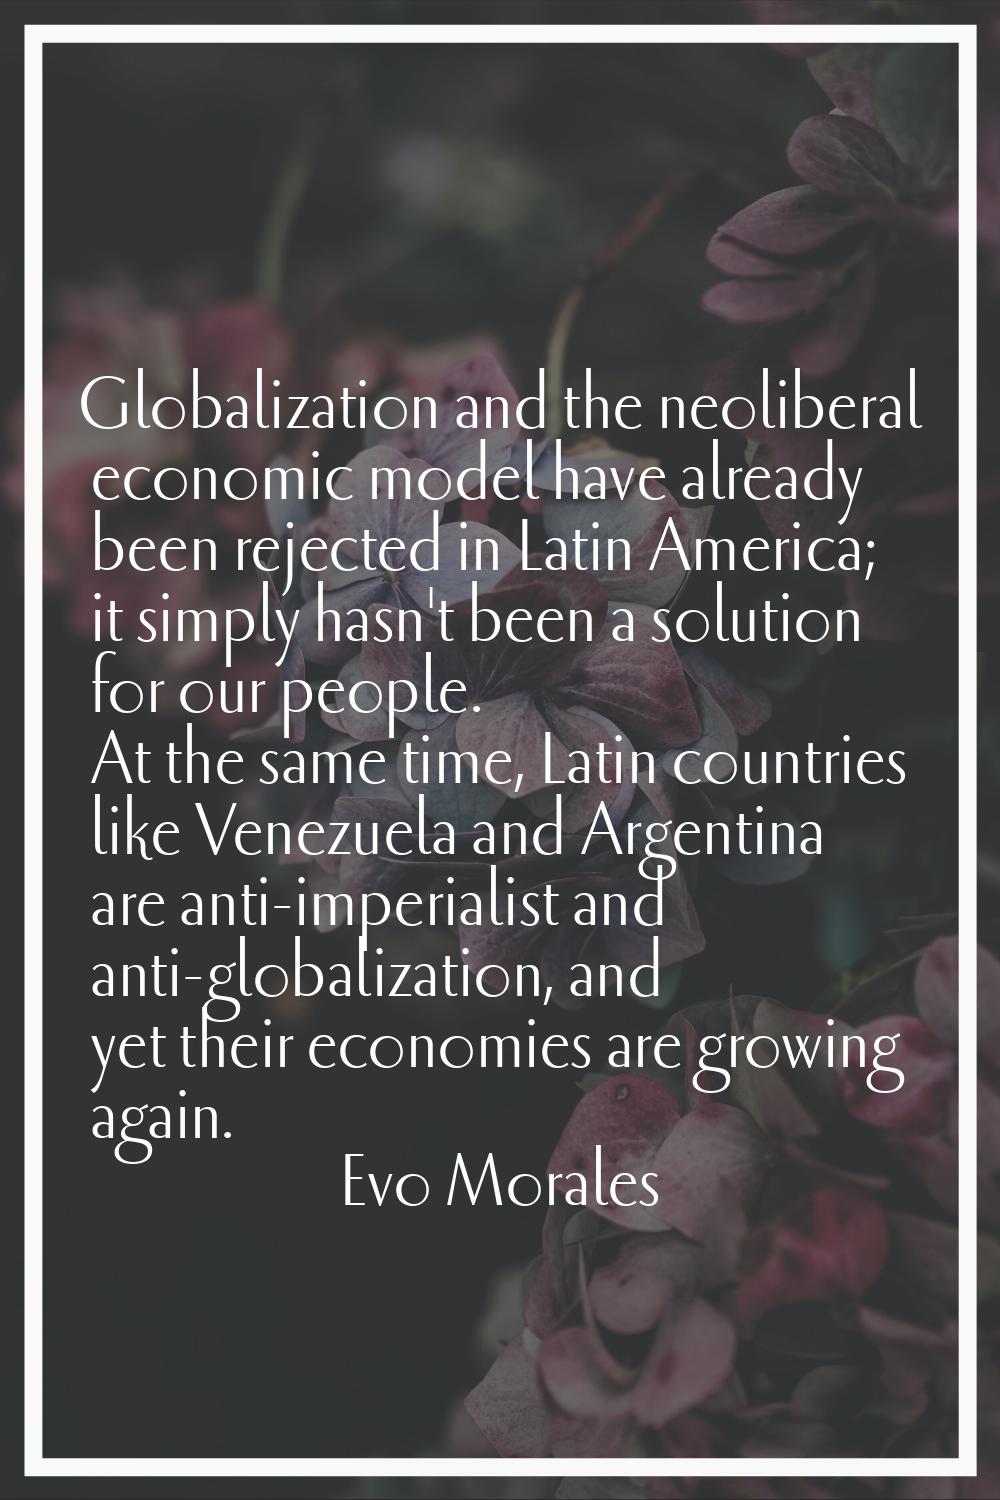 Globalization and the neoliberal economic model have already been rejected in Latin America; it sim